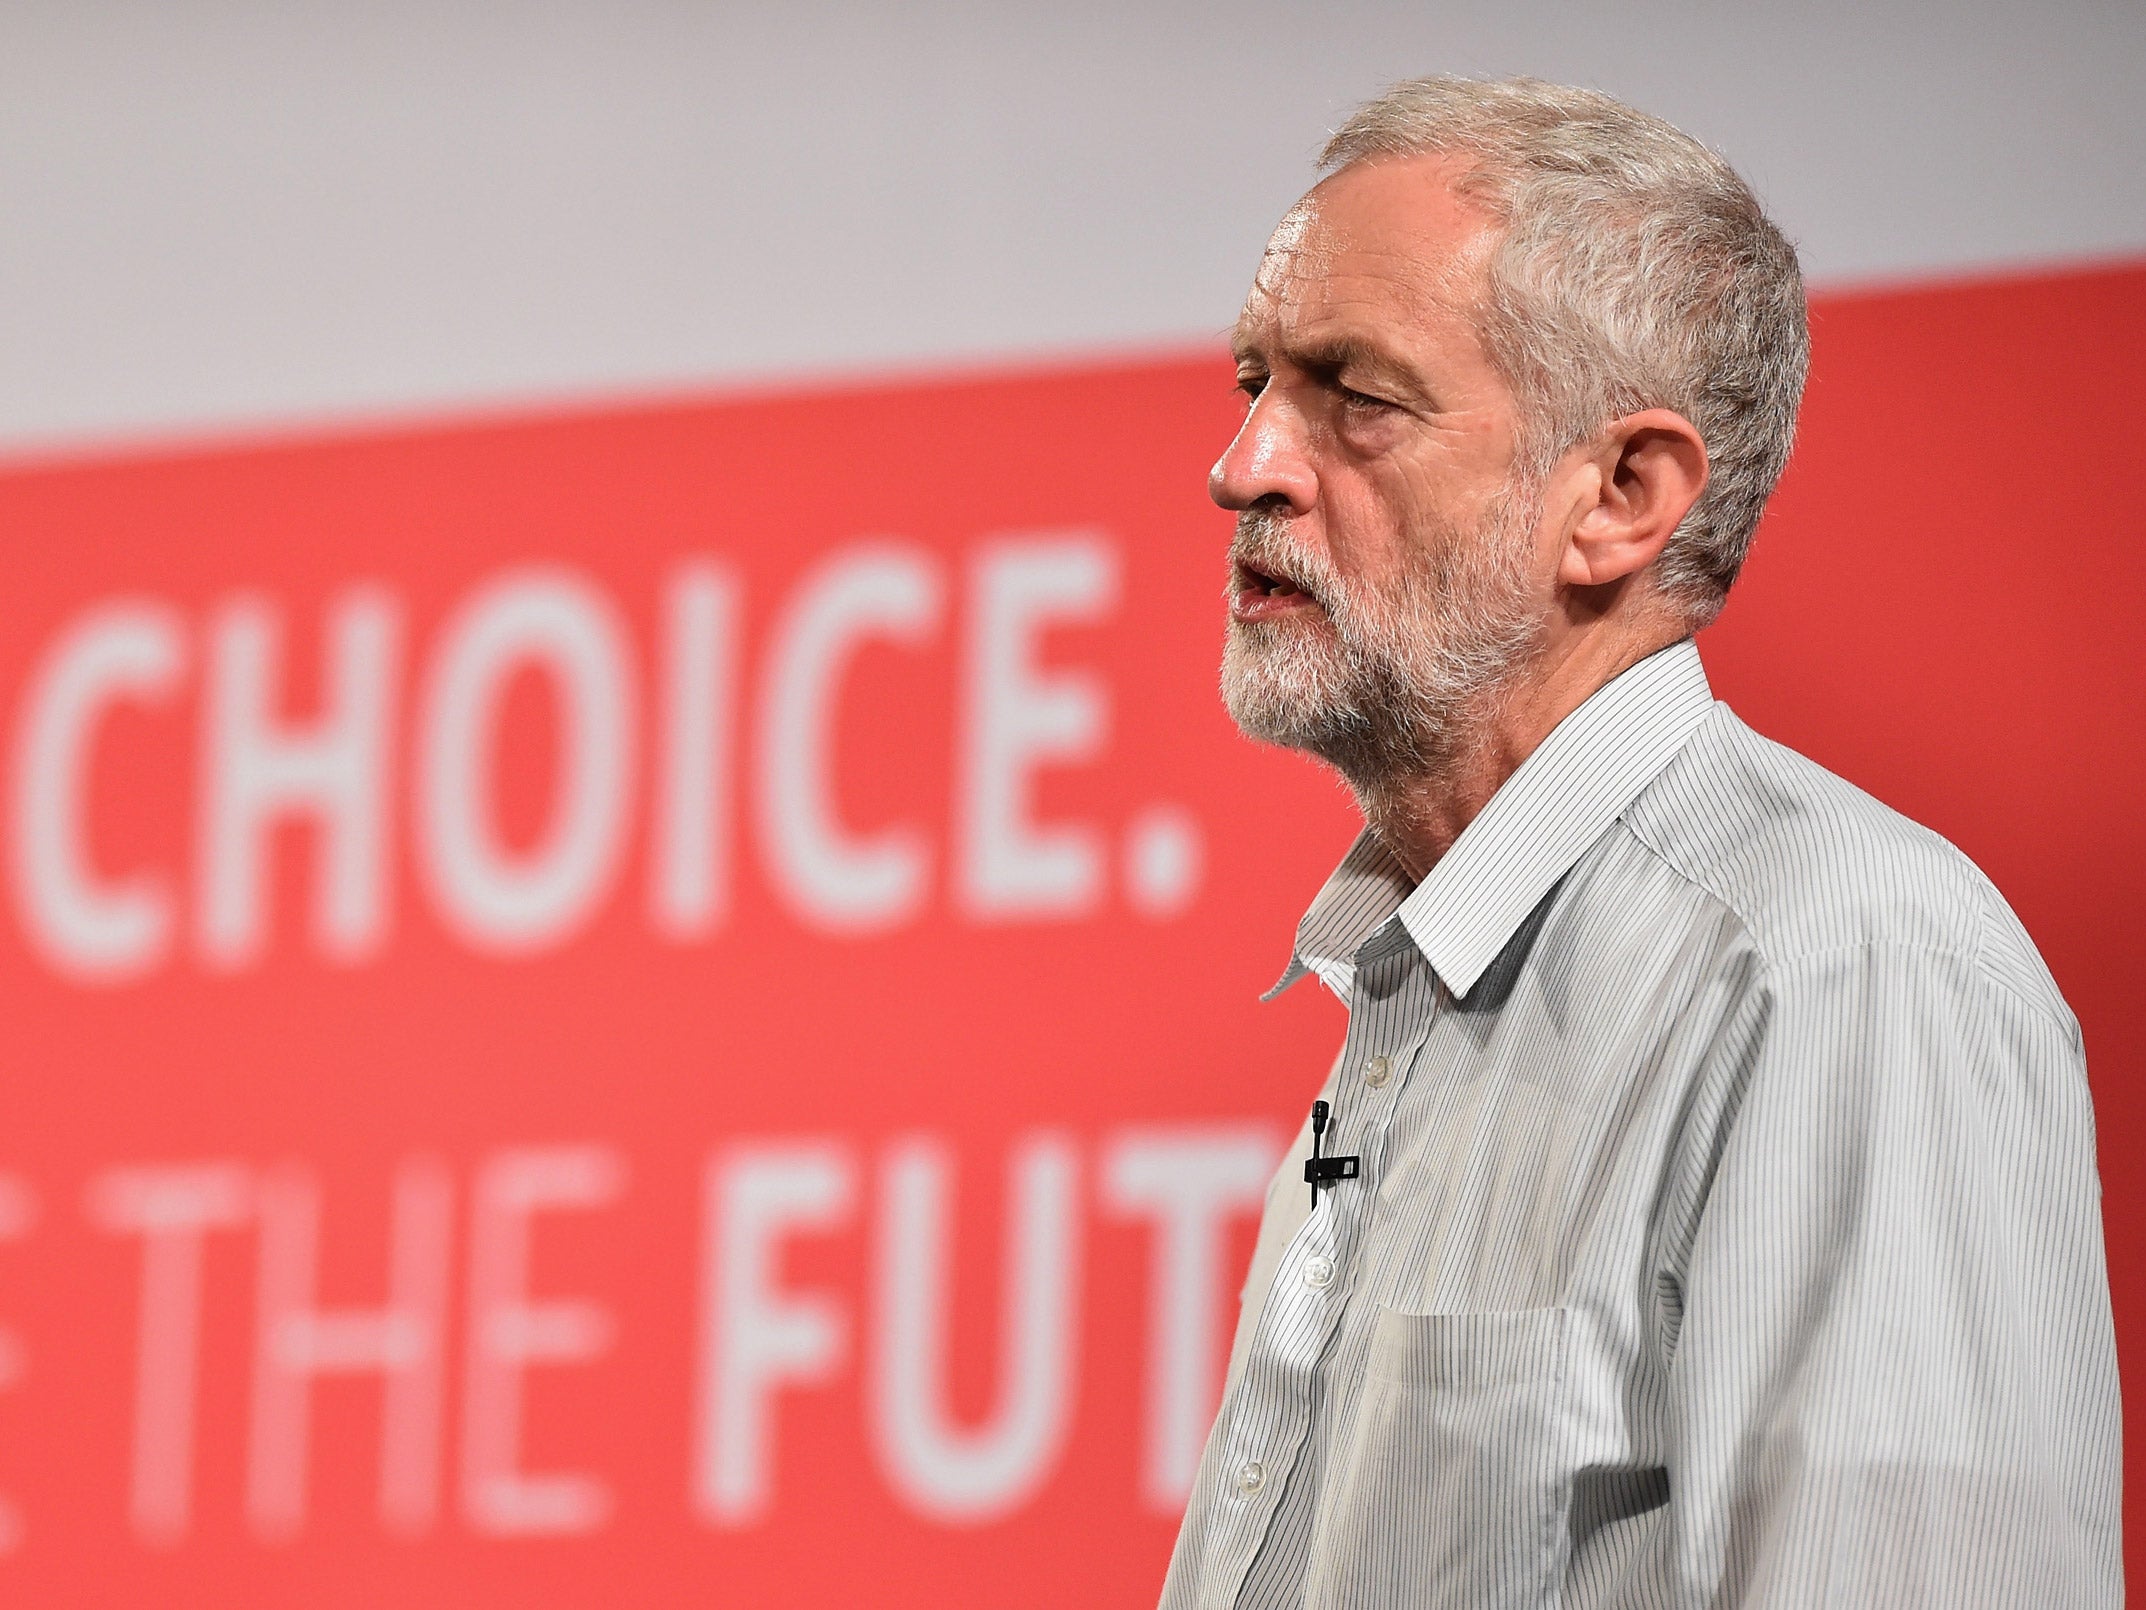 Jeremy Corbyn was one of 48 MPs to vote against welfare reforms